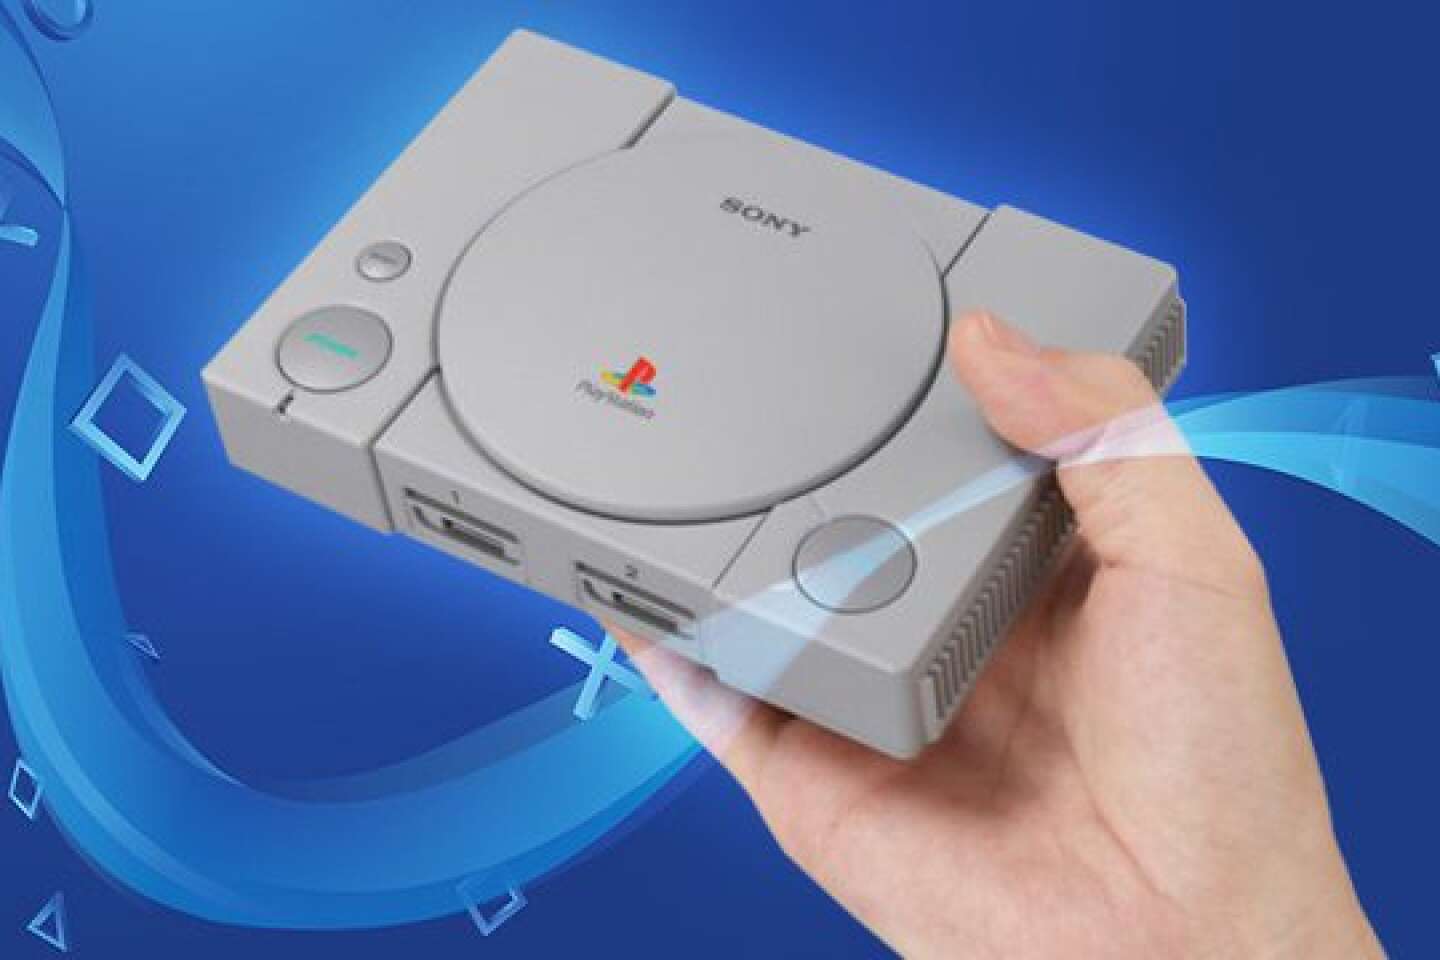 Playstation : Console Classic comprenant 20 jeux Playstation